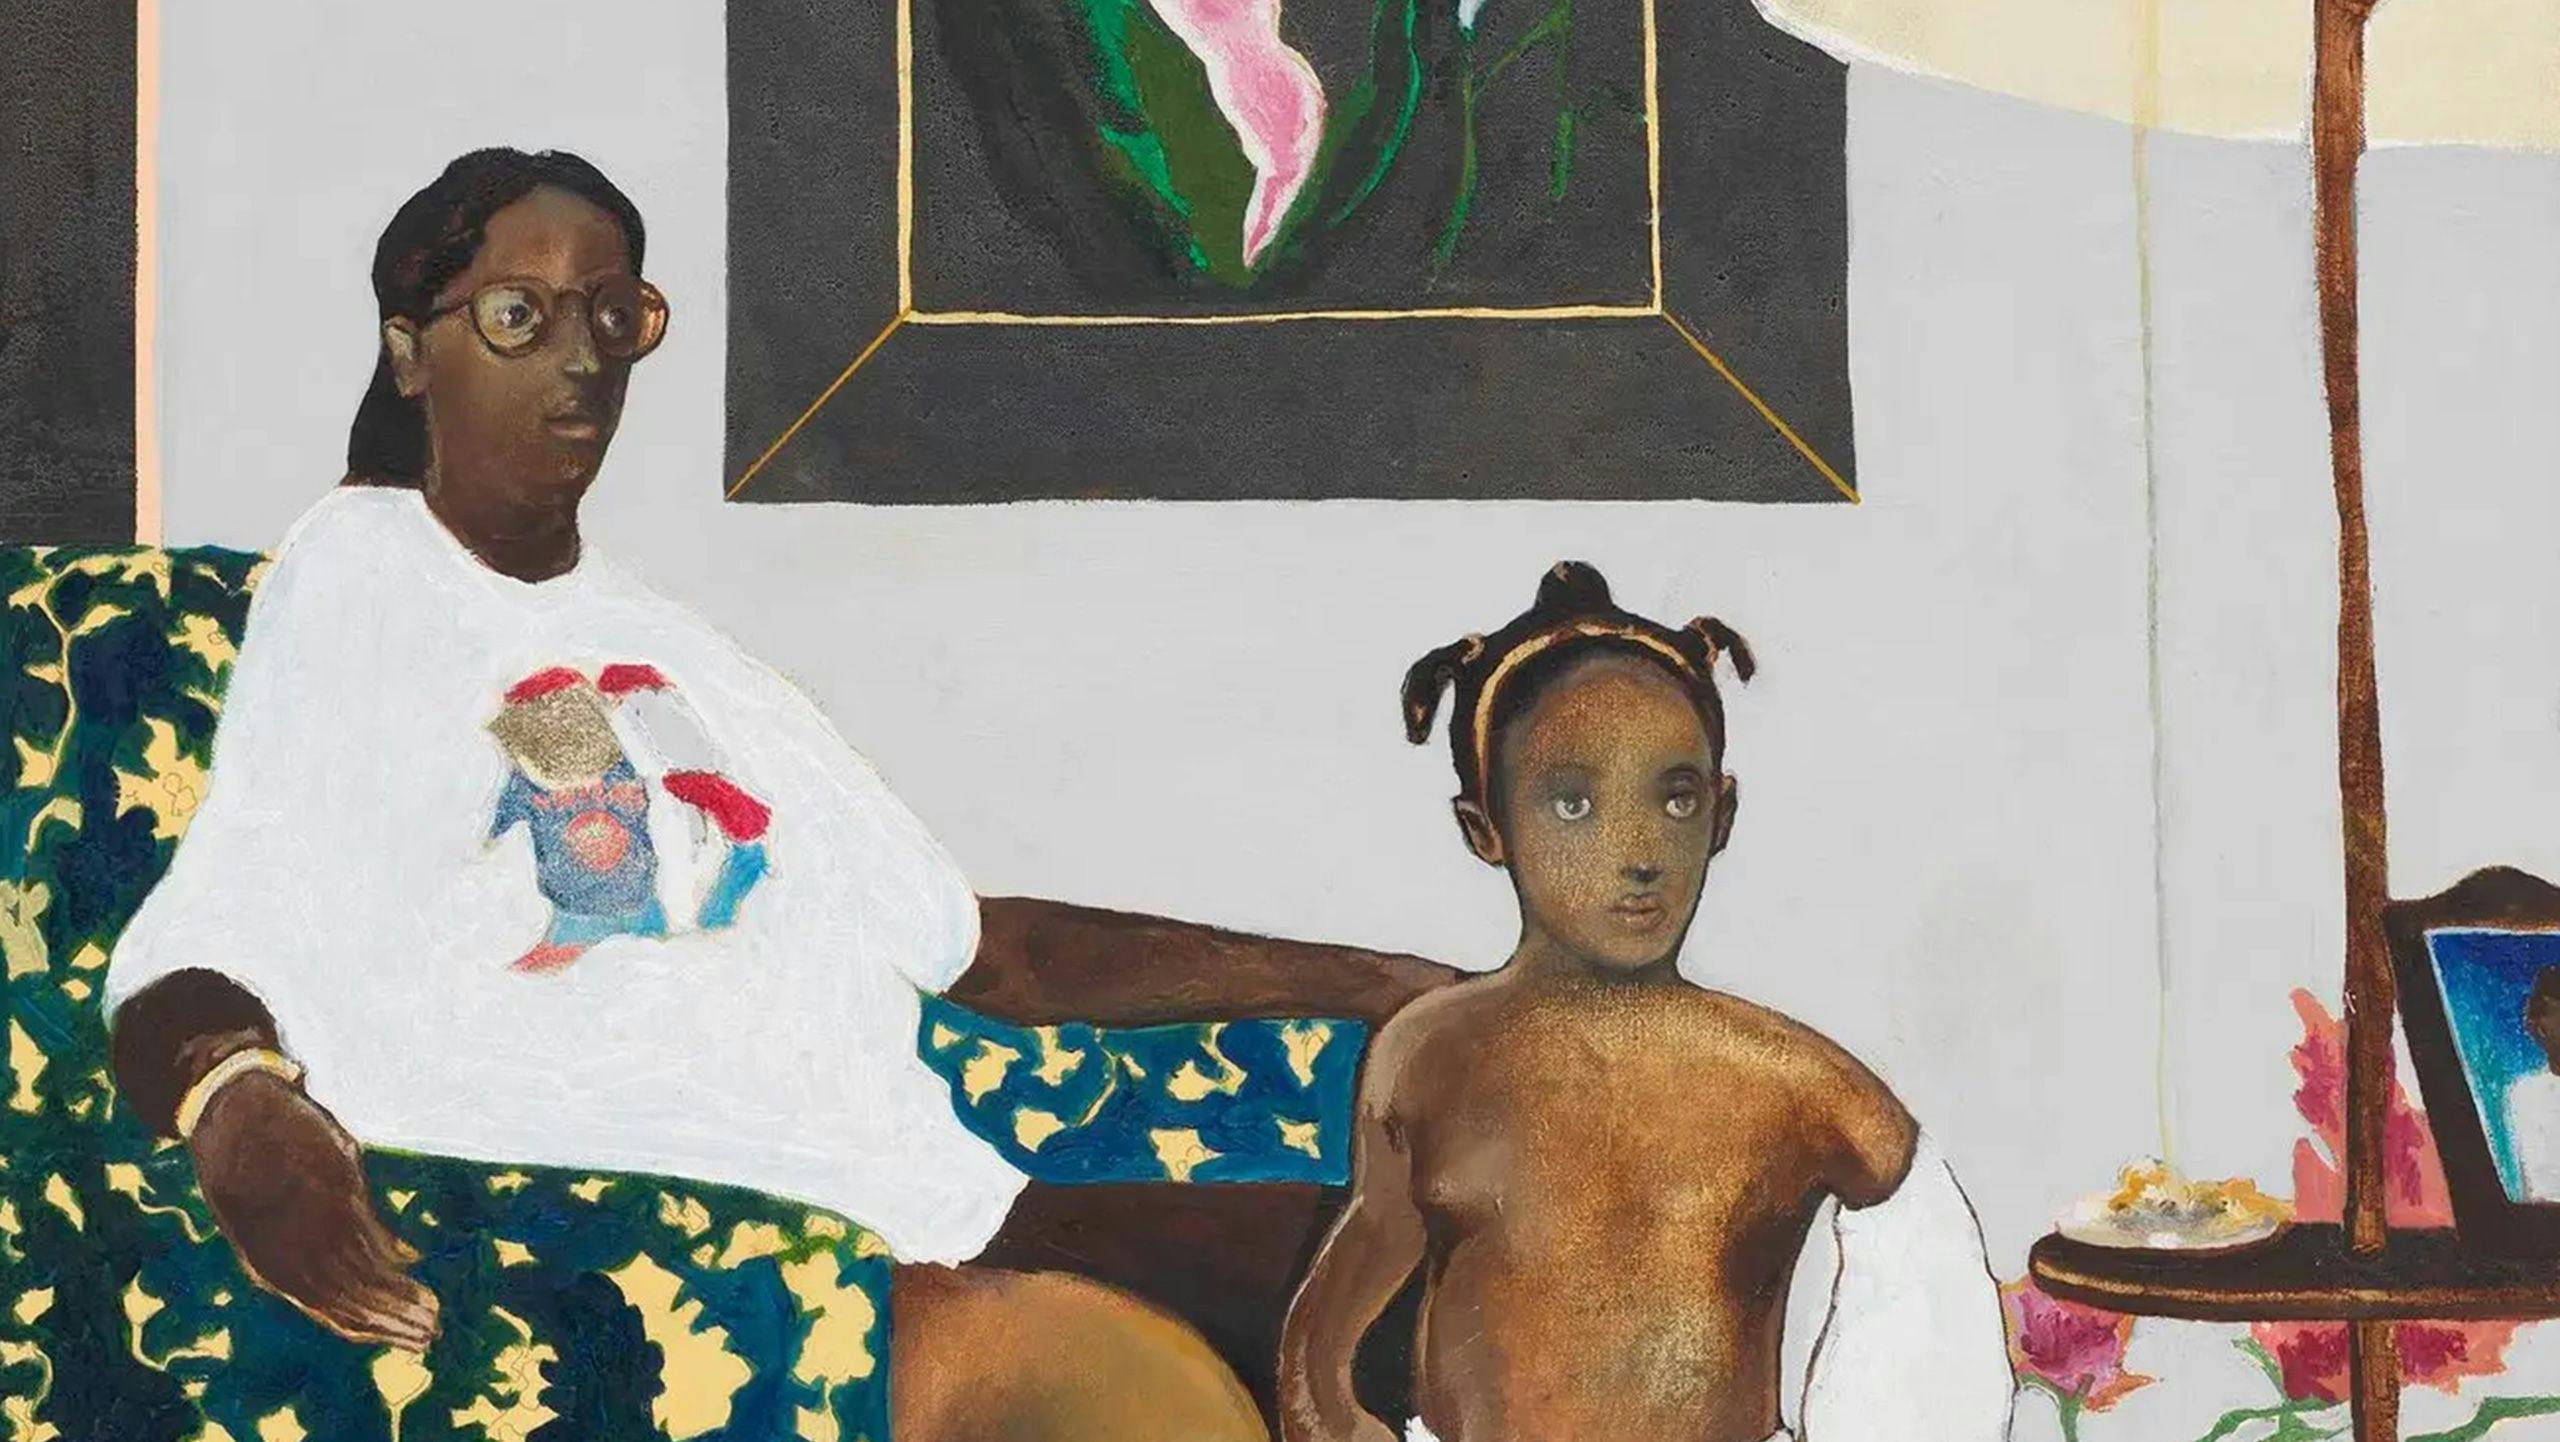 An artwork by Noah Davis, titled Single Mother With Father Out of the Picture, dated 2007-2008.